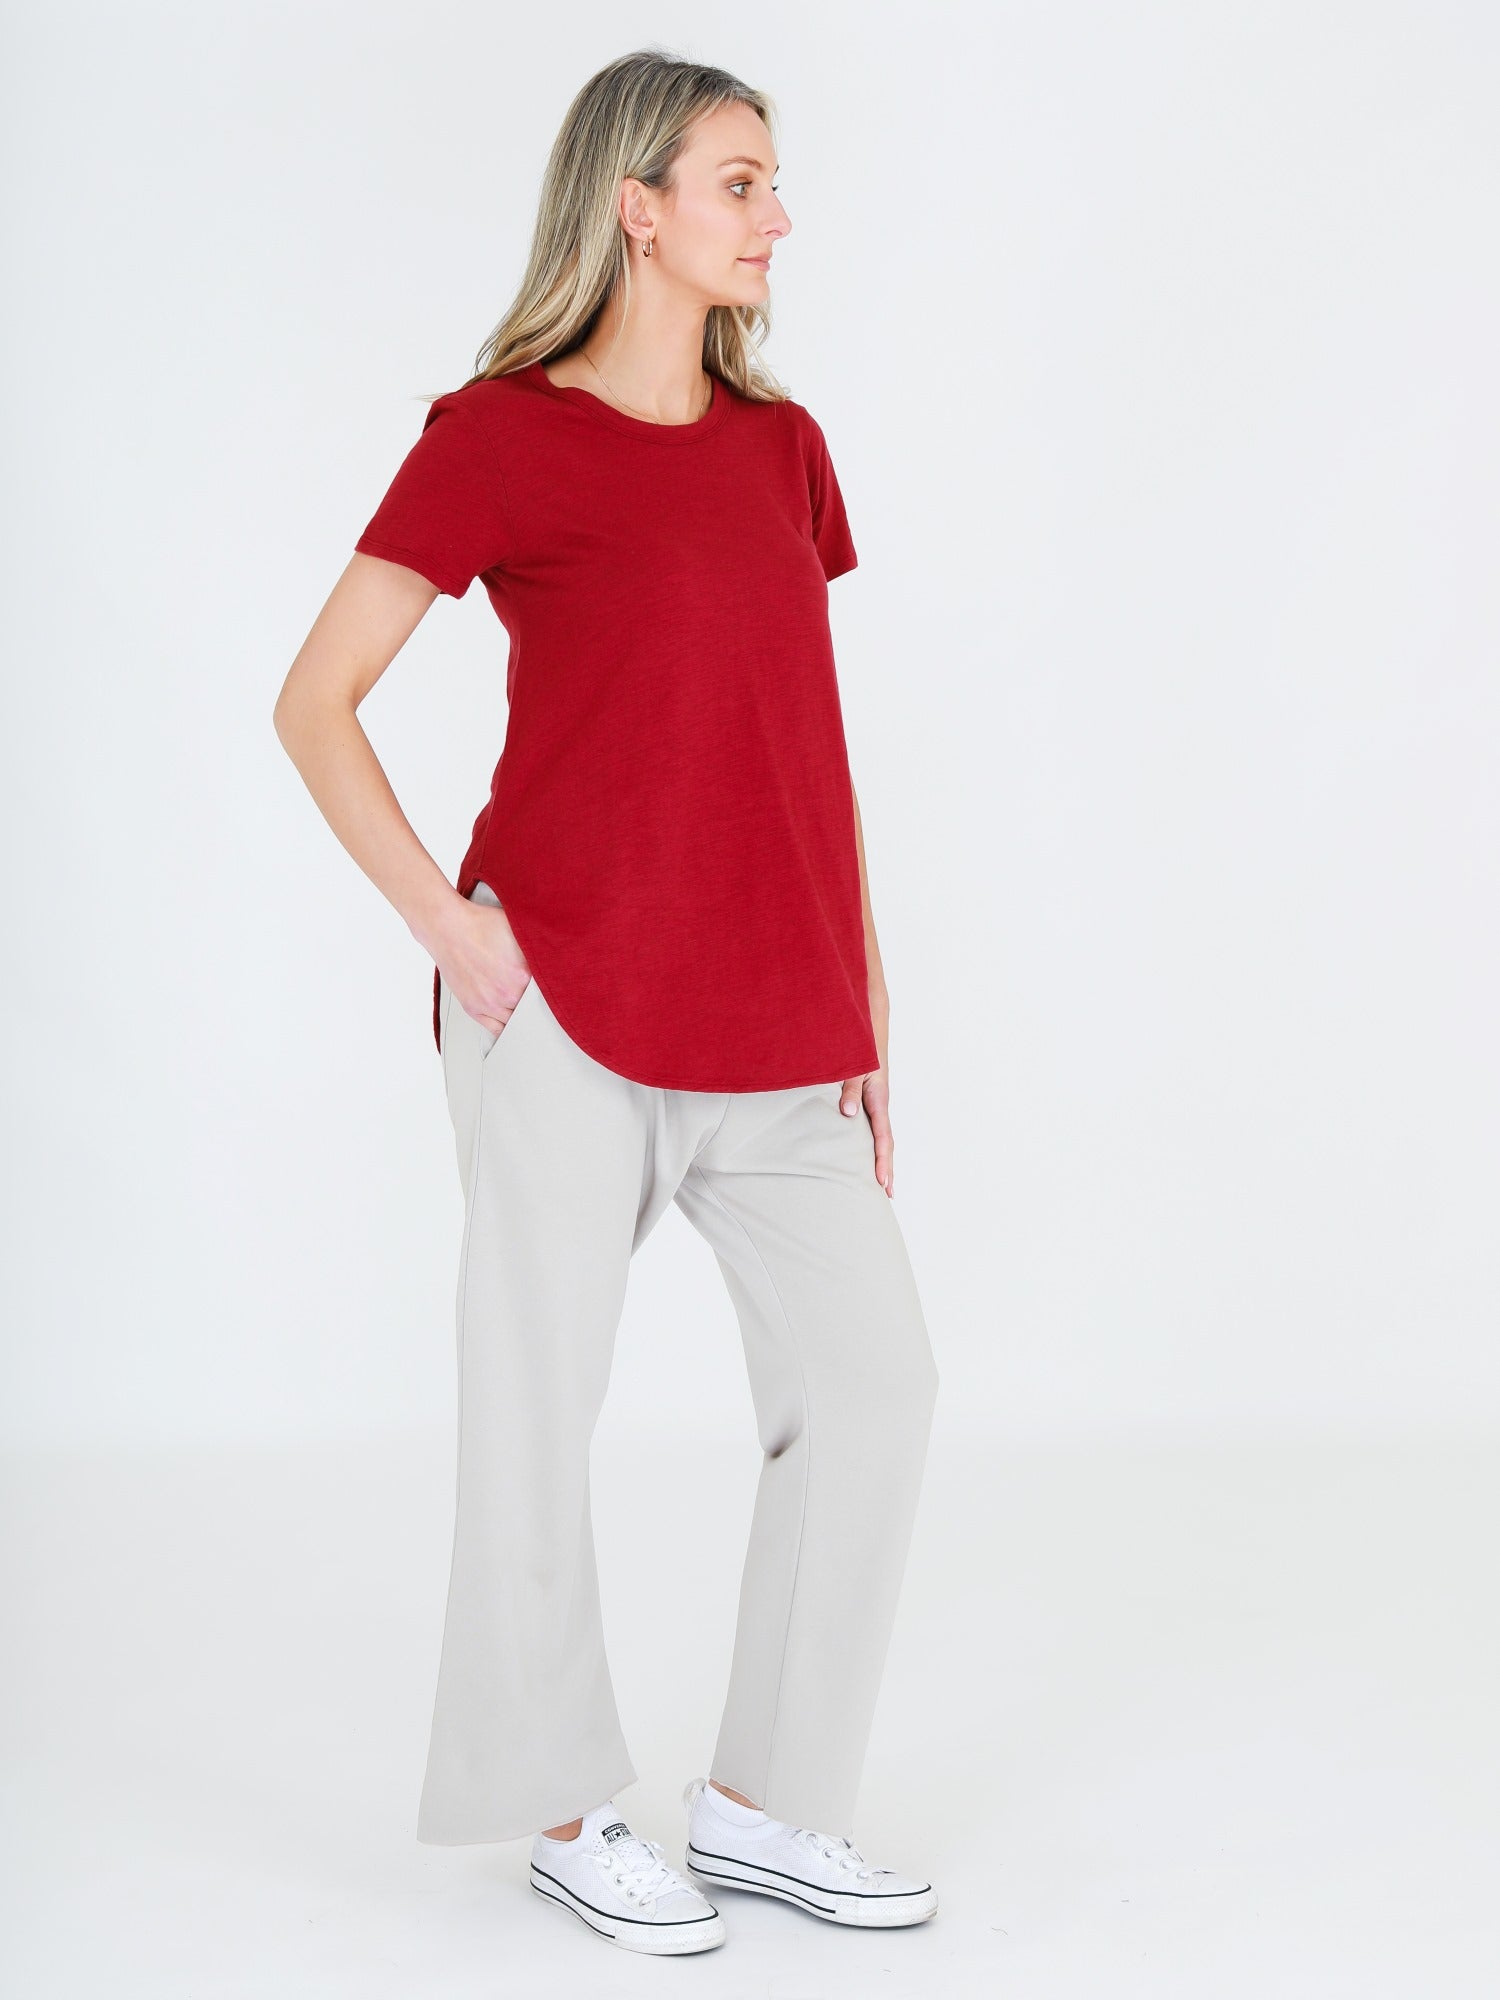 red tshirt women #color_cranberry